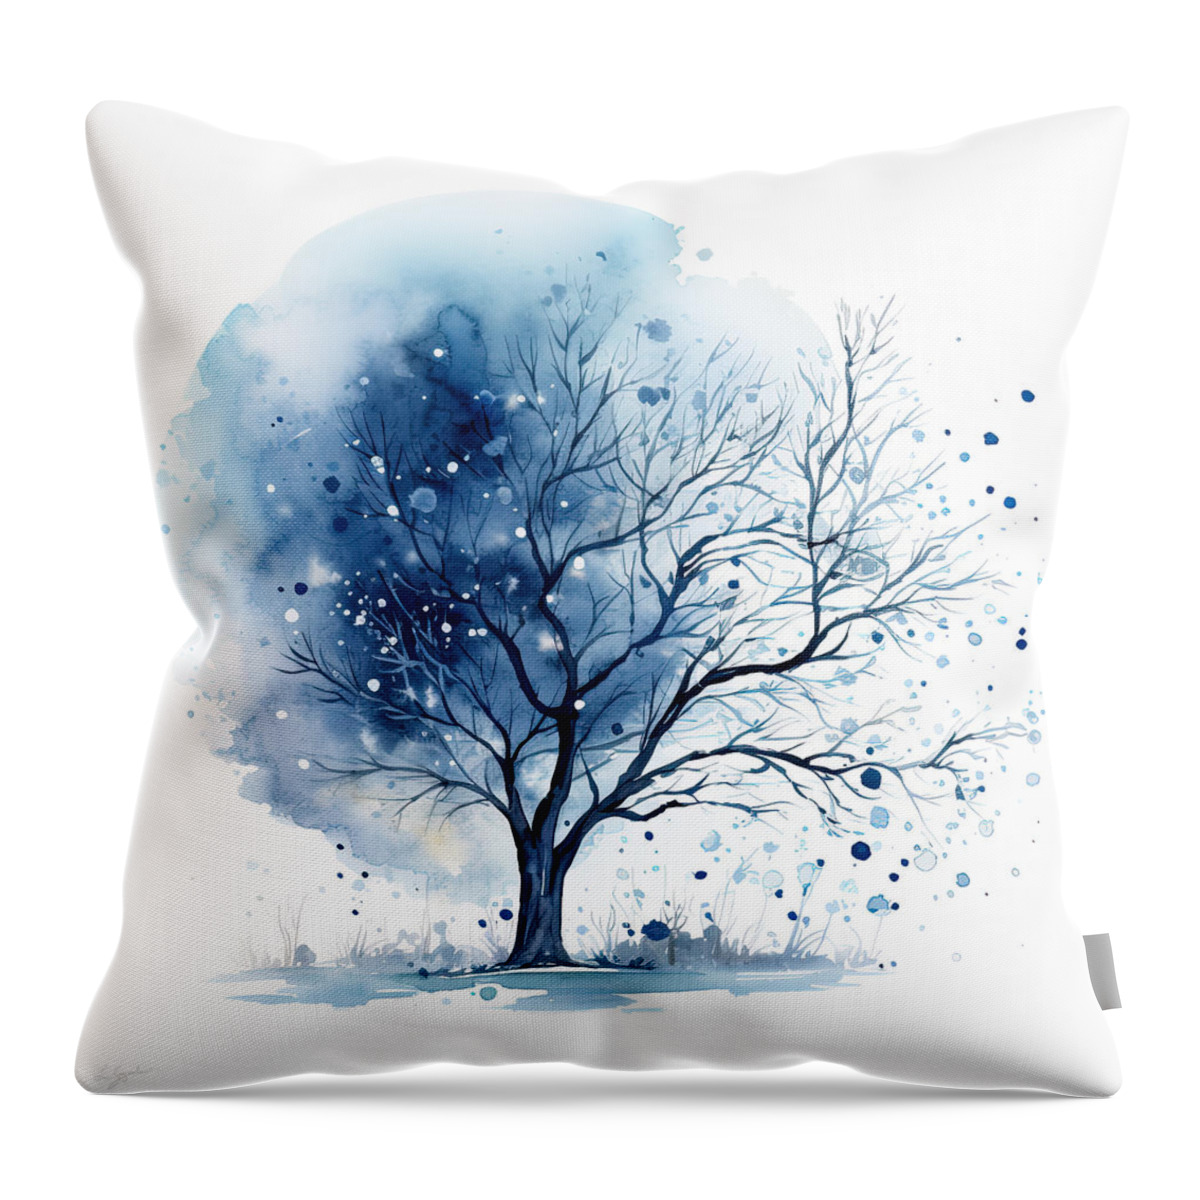 Four Seasons Throw Pillow featuring the painting Winter- Four Seasons Painting by Lourry Legarde